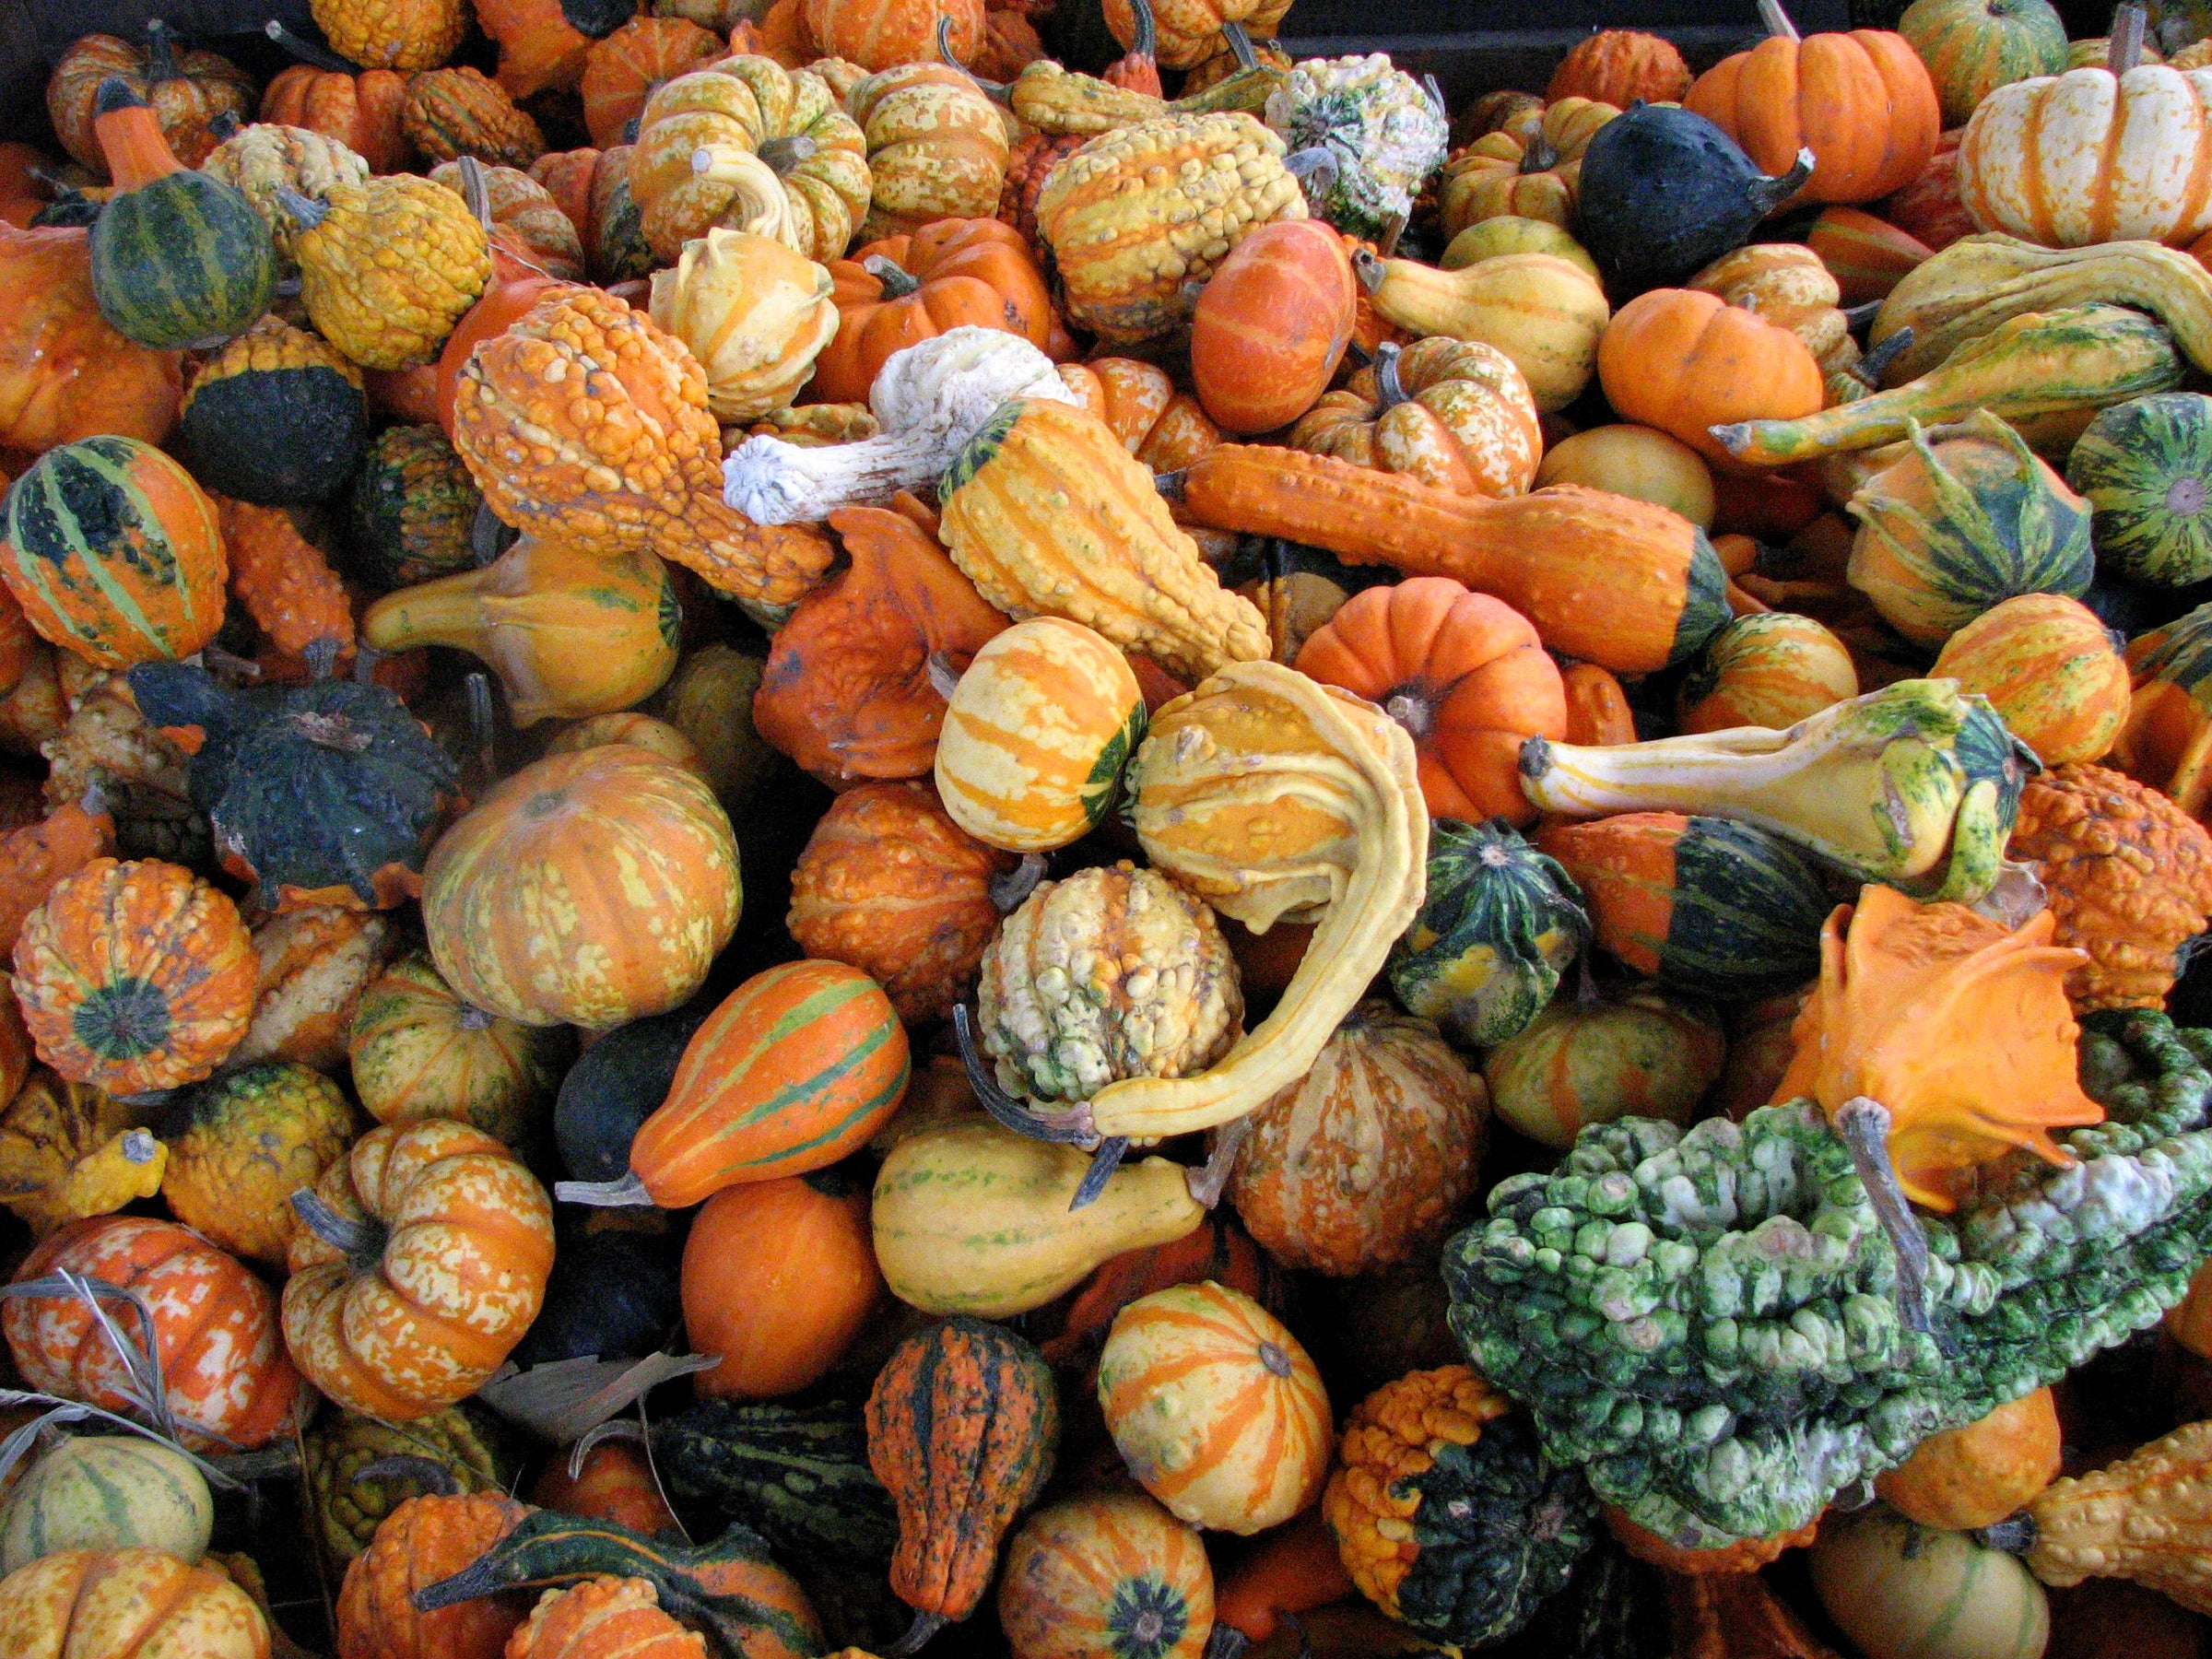 Grow a variety of decorative gourds in your garden